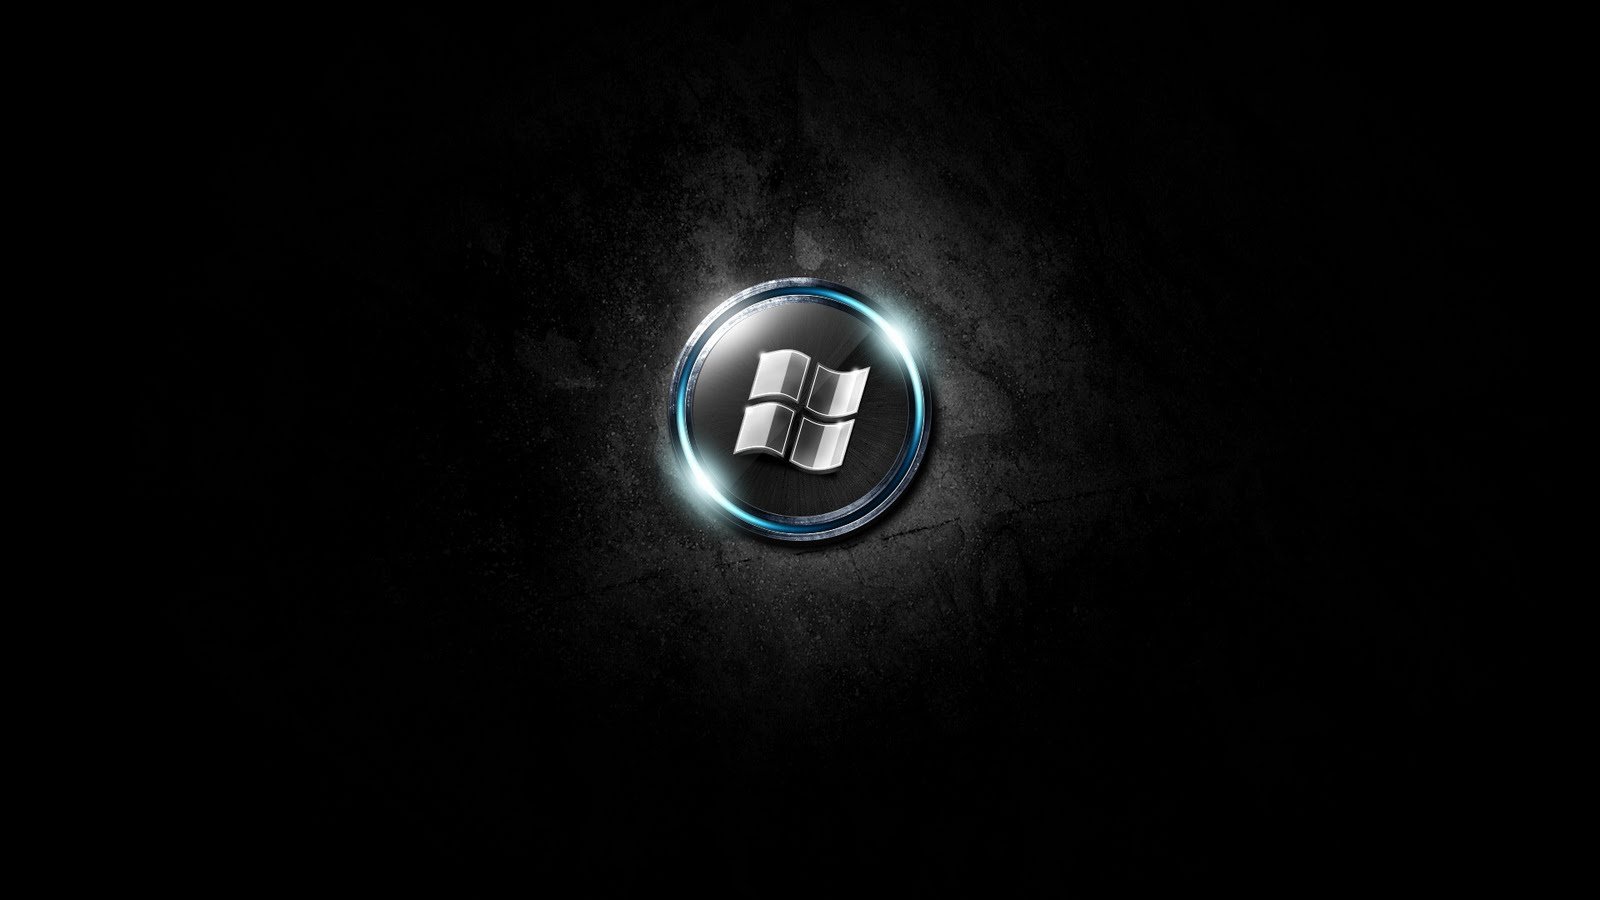 cool windows 7 logo full hd wallpaper is a great wallpaper for your 1600x900